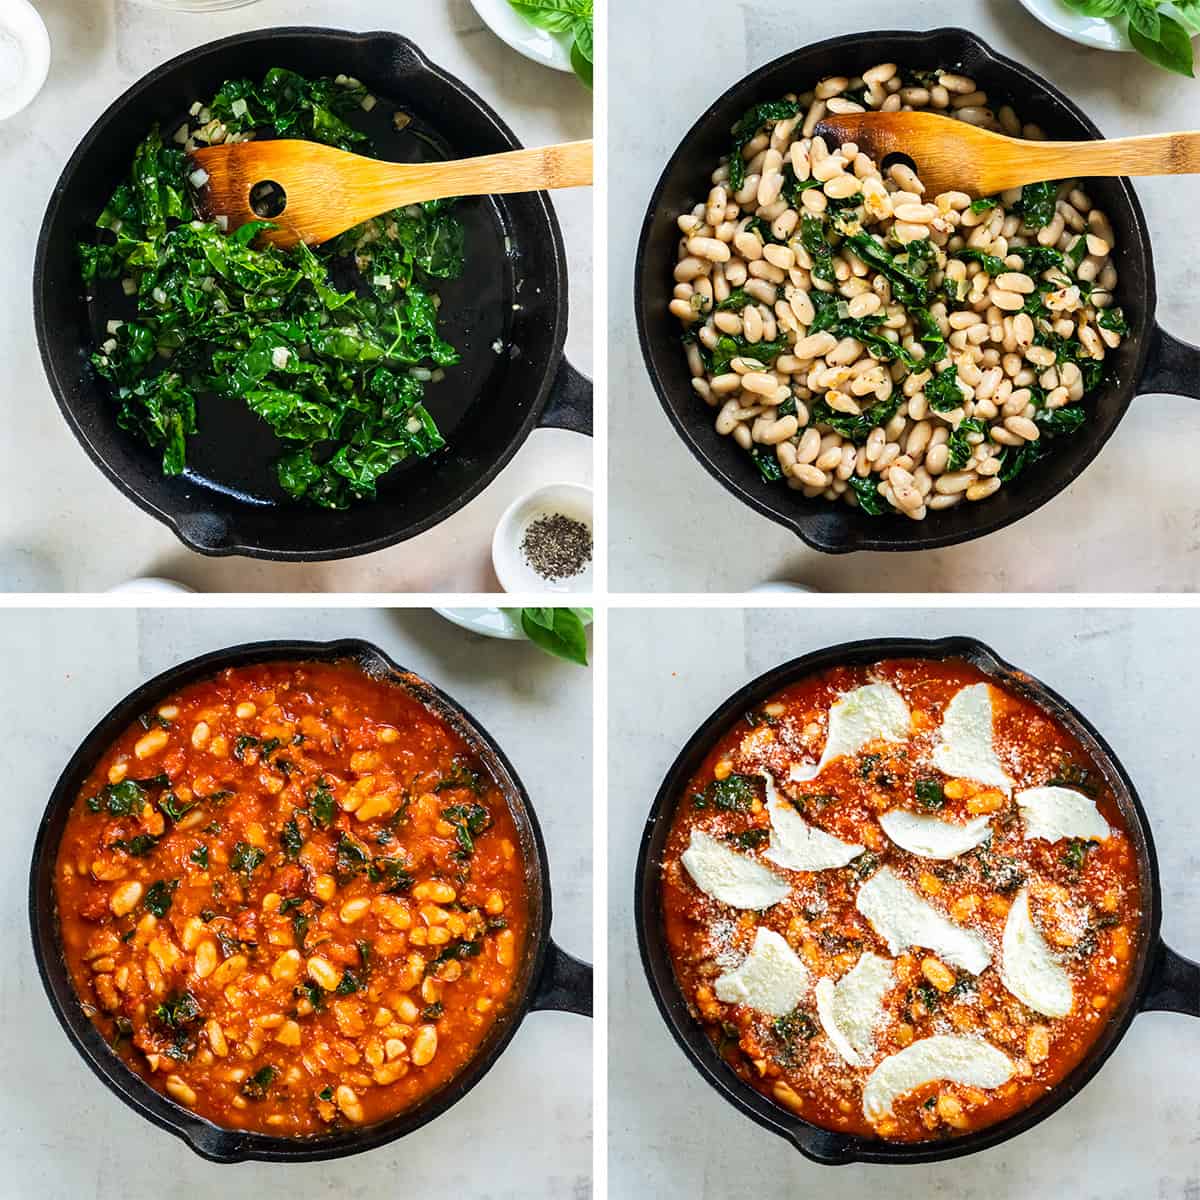 Four images of kale, white beans, marinara sauce, and cheese in a cast iron skillet.